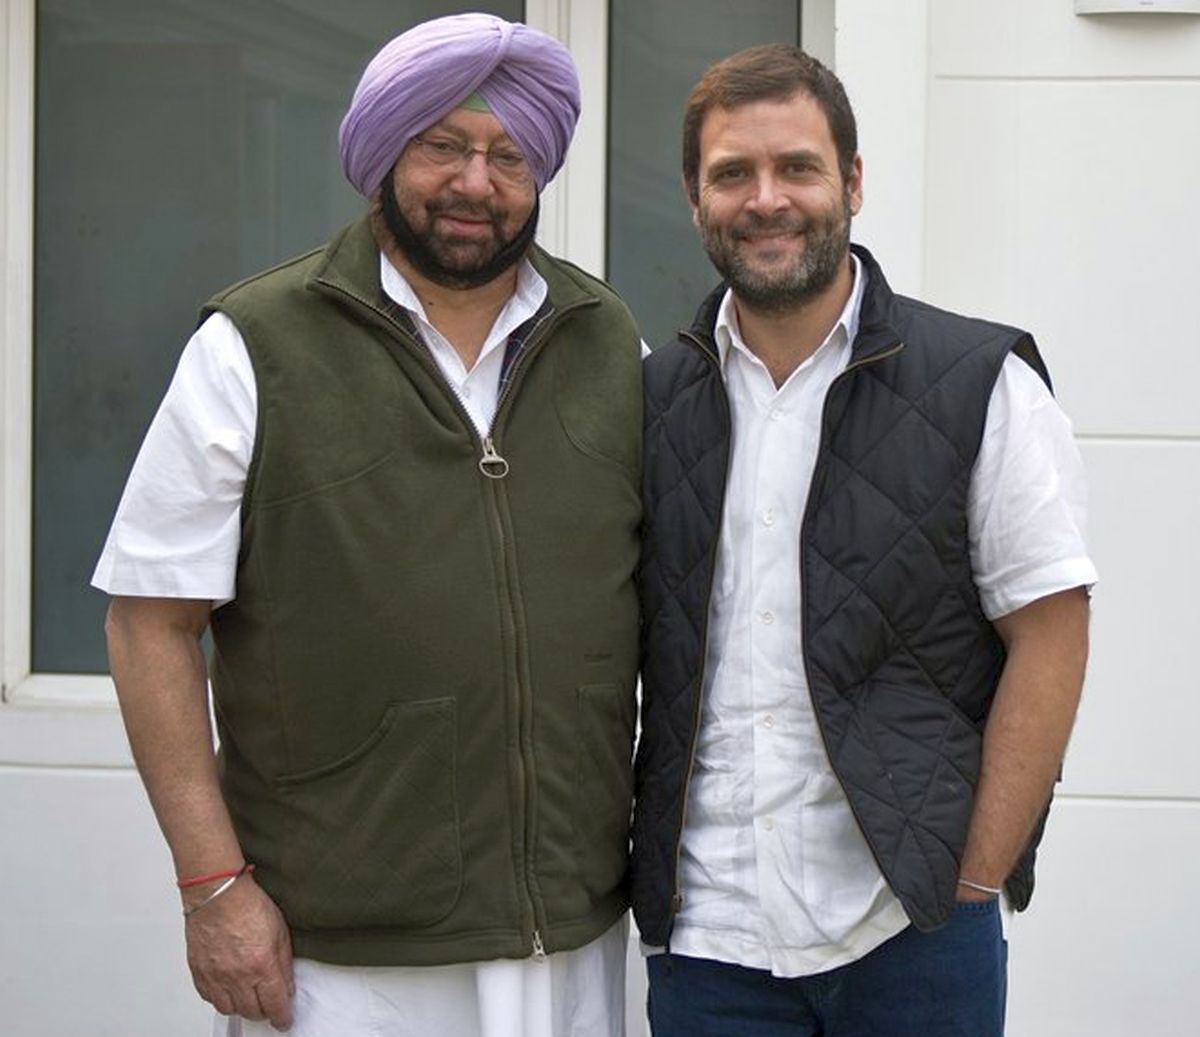 Will Punjab's Malerkotla move help Cong in UP, Guj?